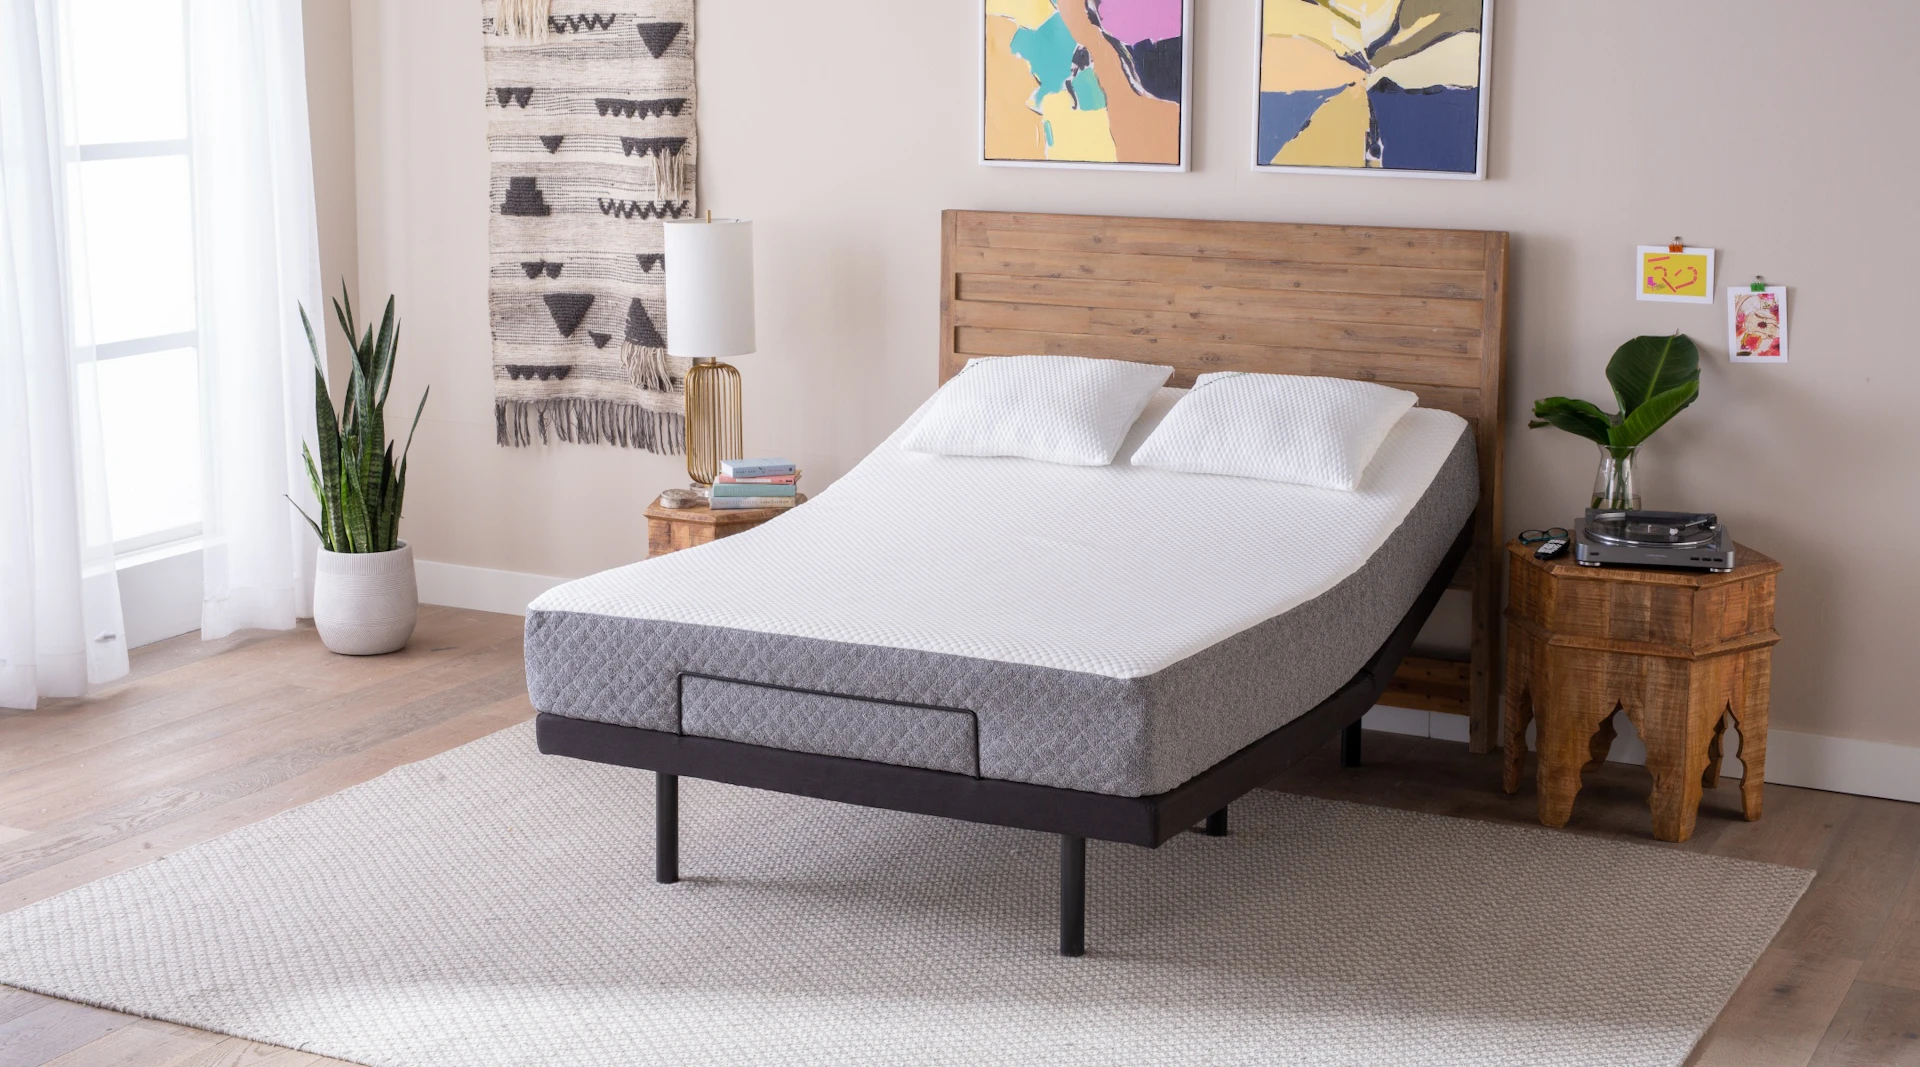 GhostBed Adjustable Base paired with a large headboard.